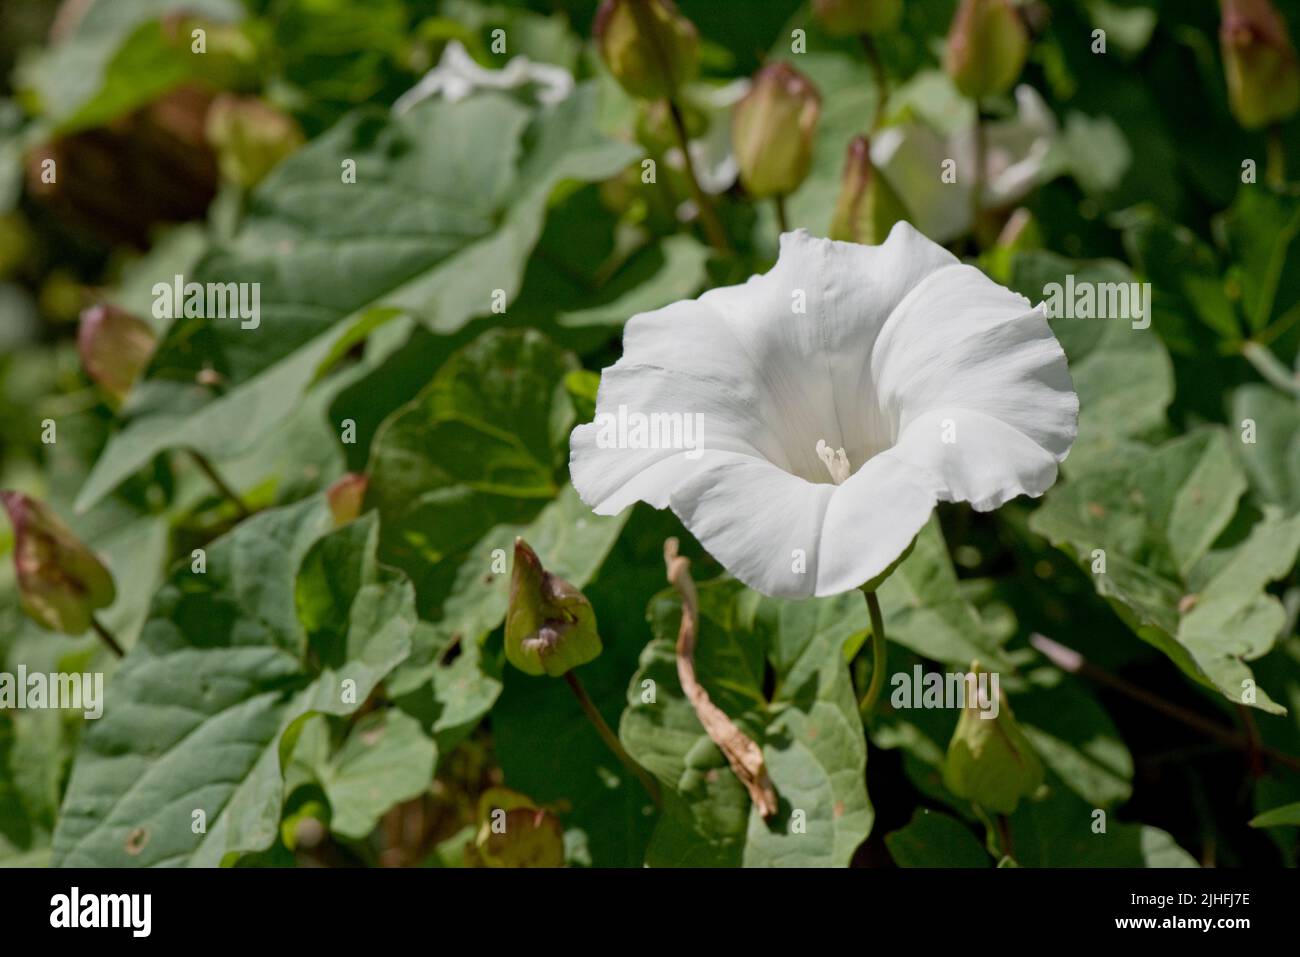 Greater or hedge bindweed (Calystegia sepium) white trumpet-shaped, flower among leaves of a climbing weed, Berkshire, July Stock Photo